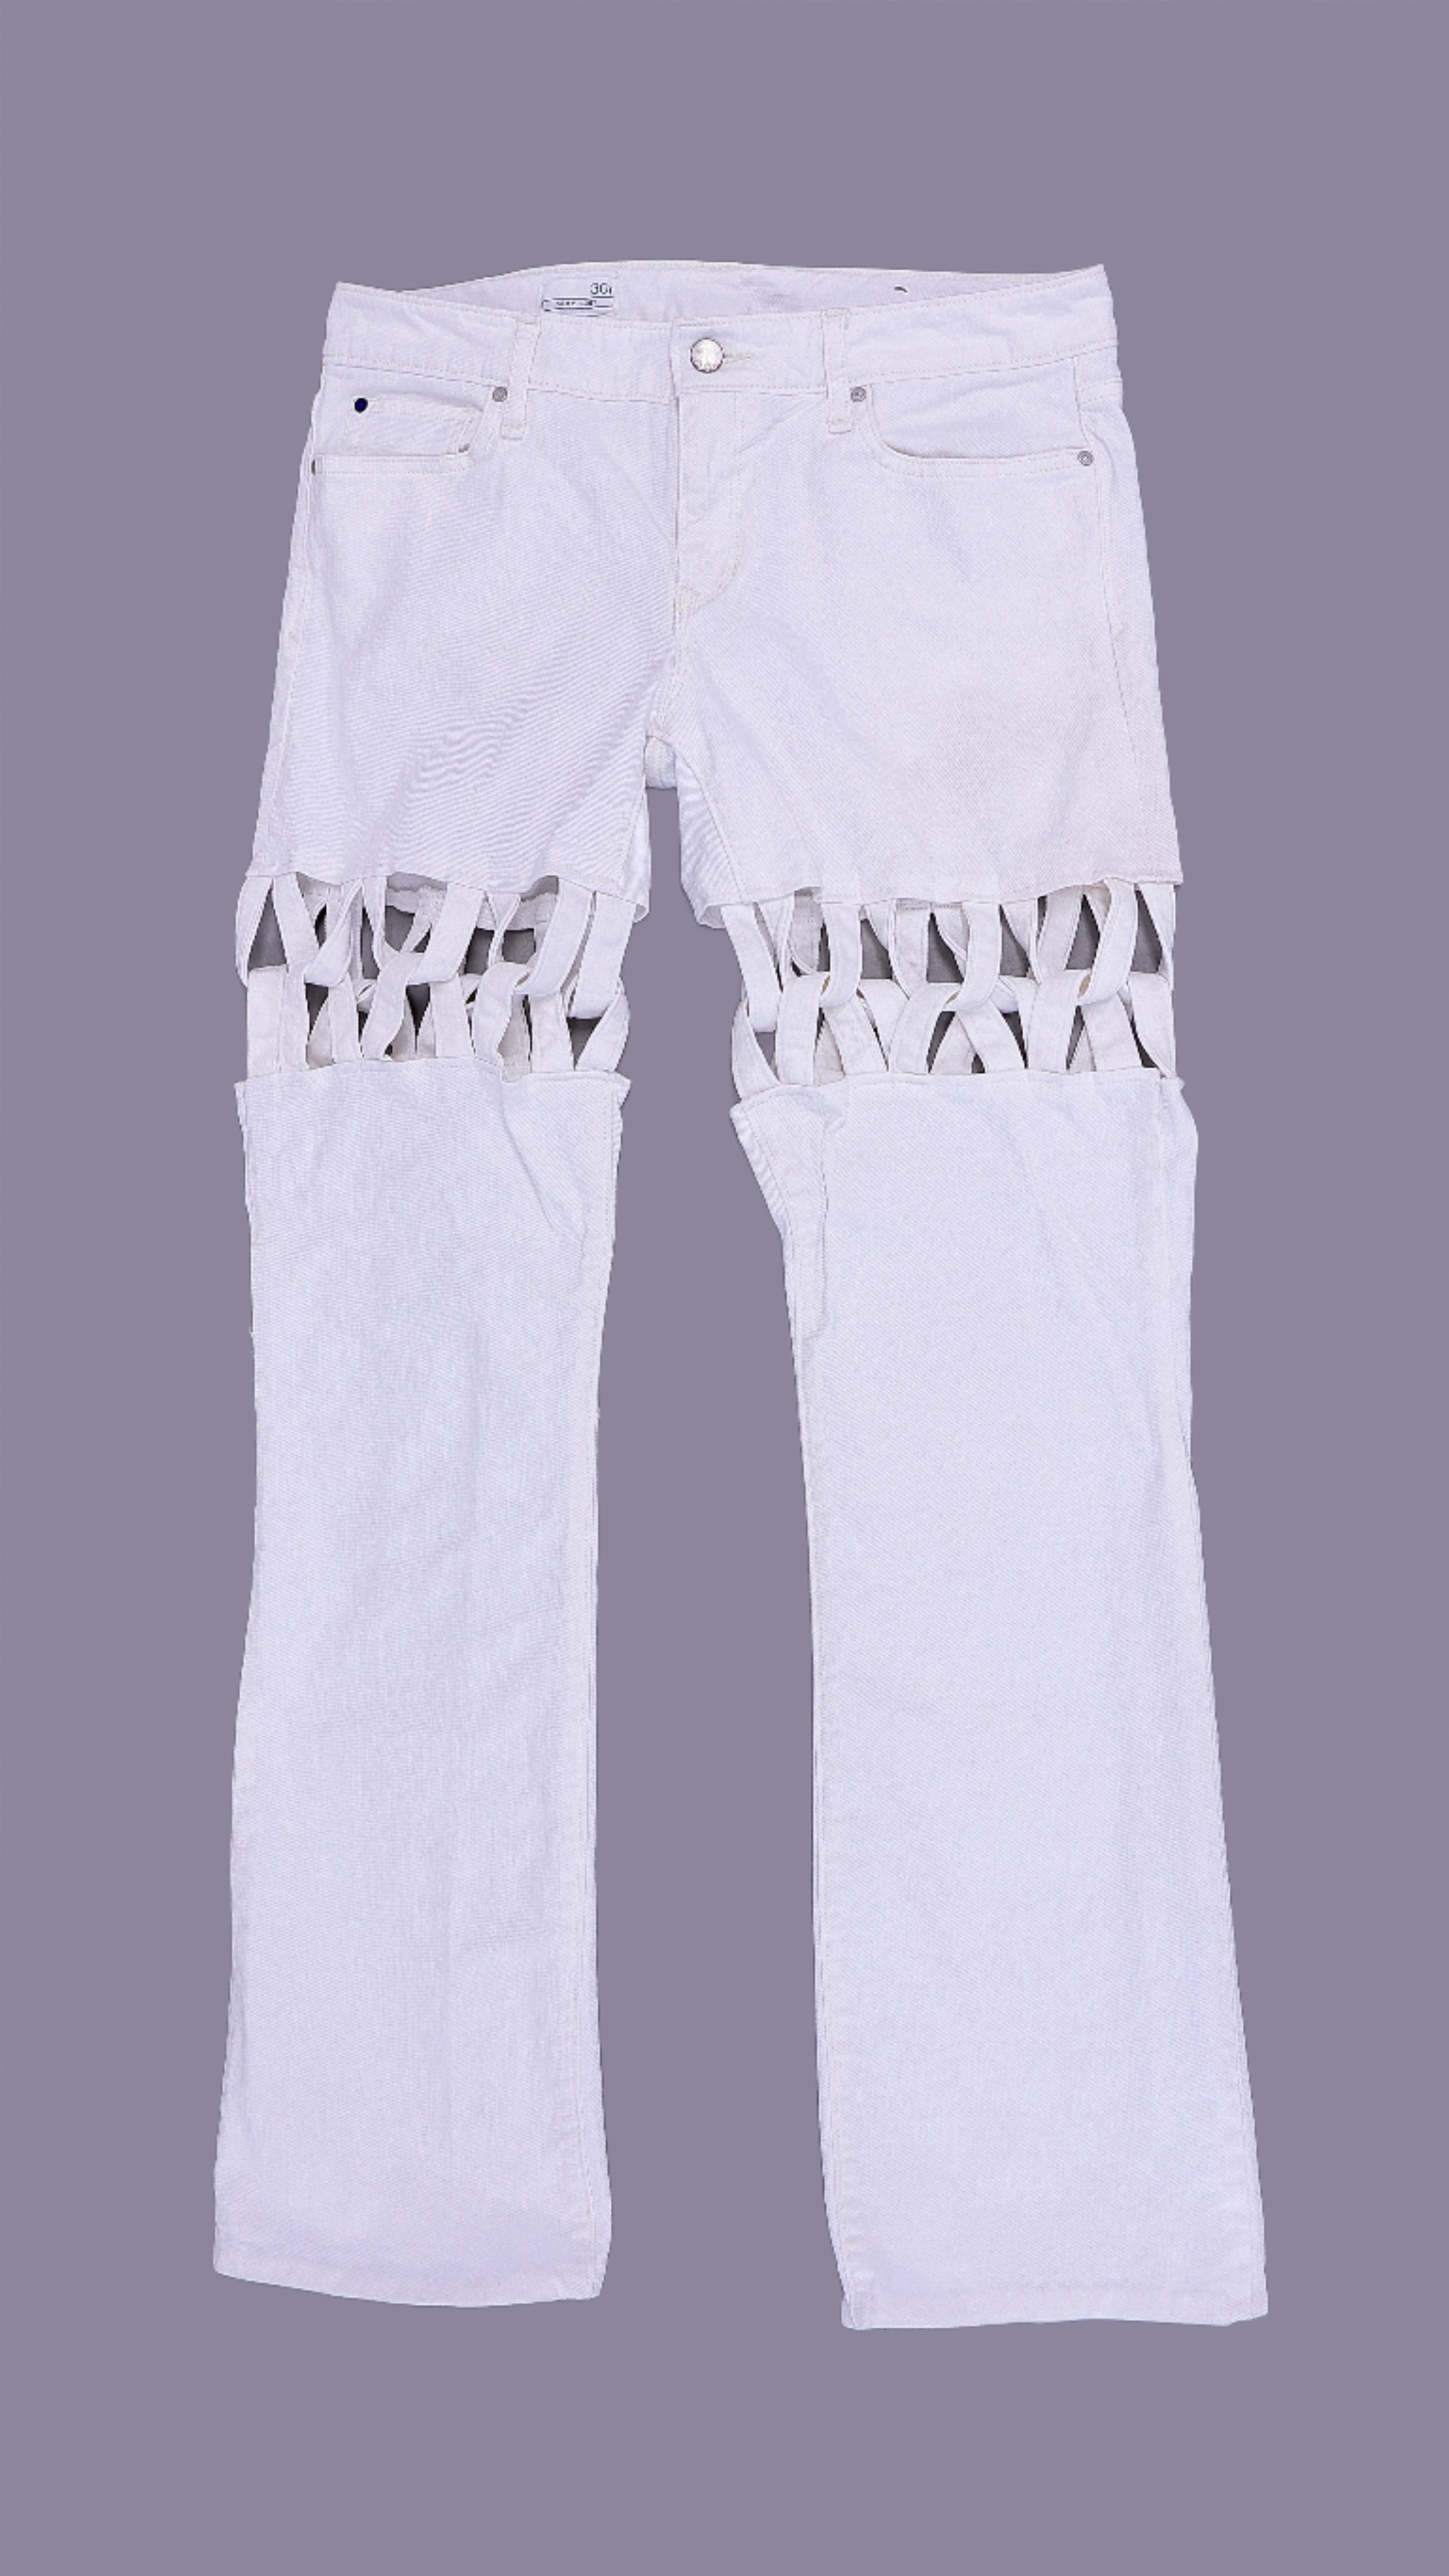 Criss Cross Jeans - White (Size 8)